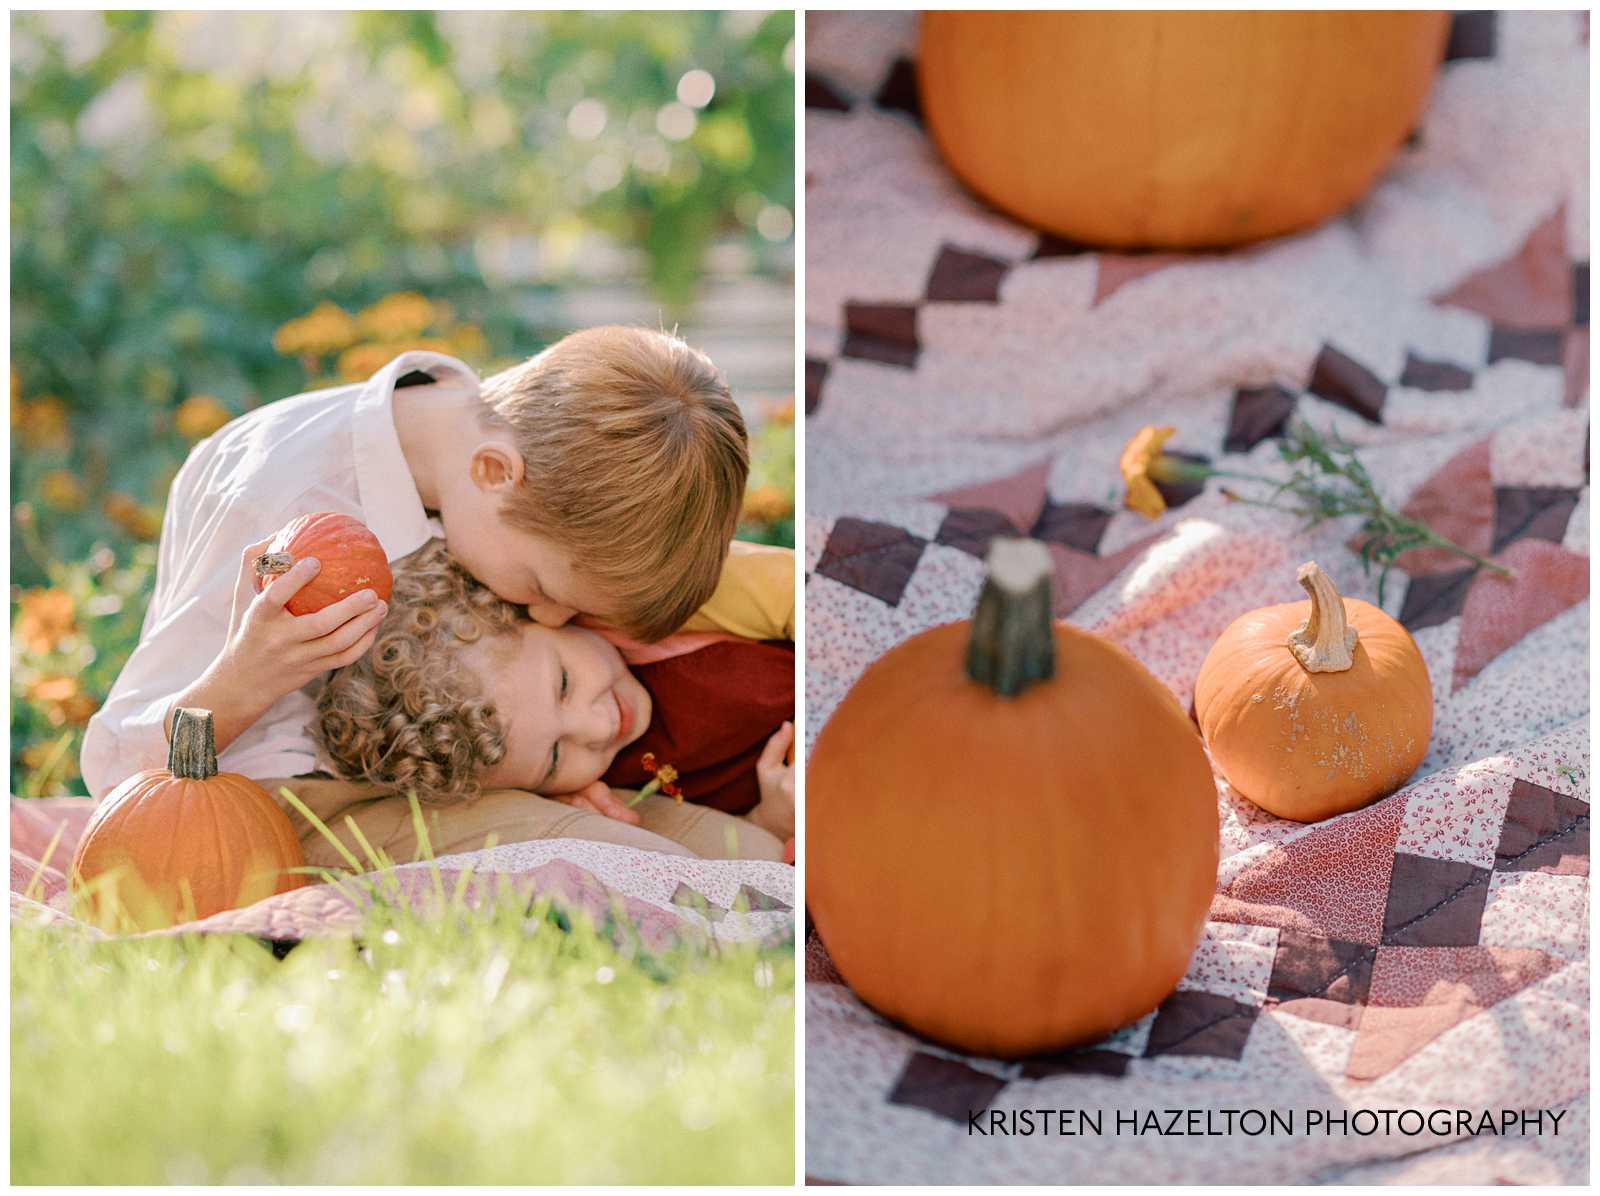 Little boy and toddler girl on a blanket with pumpkins from a farmers market in Chicago